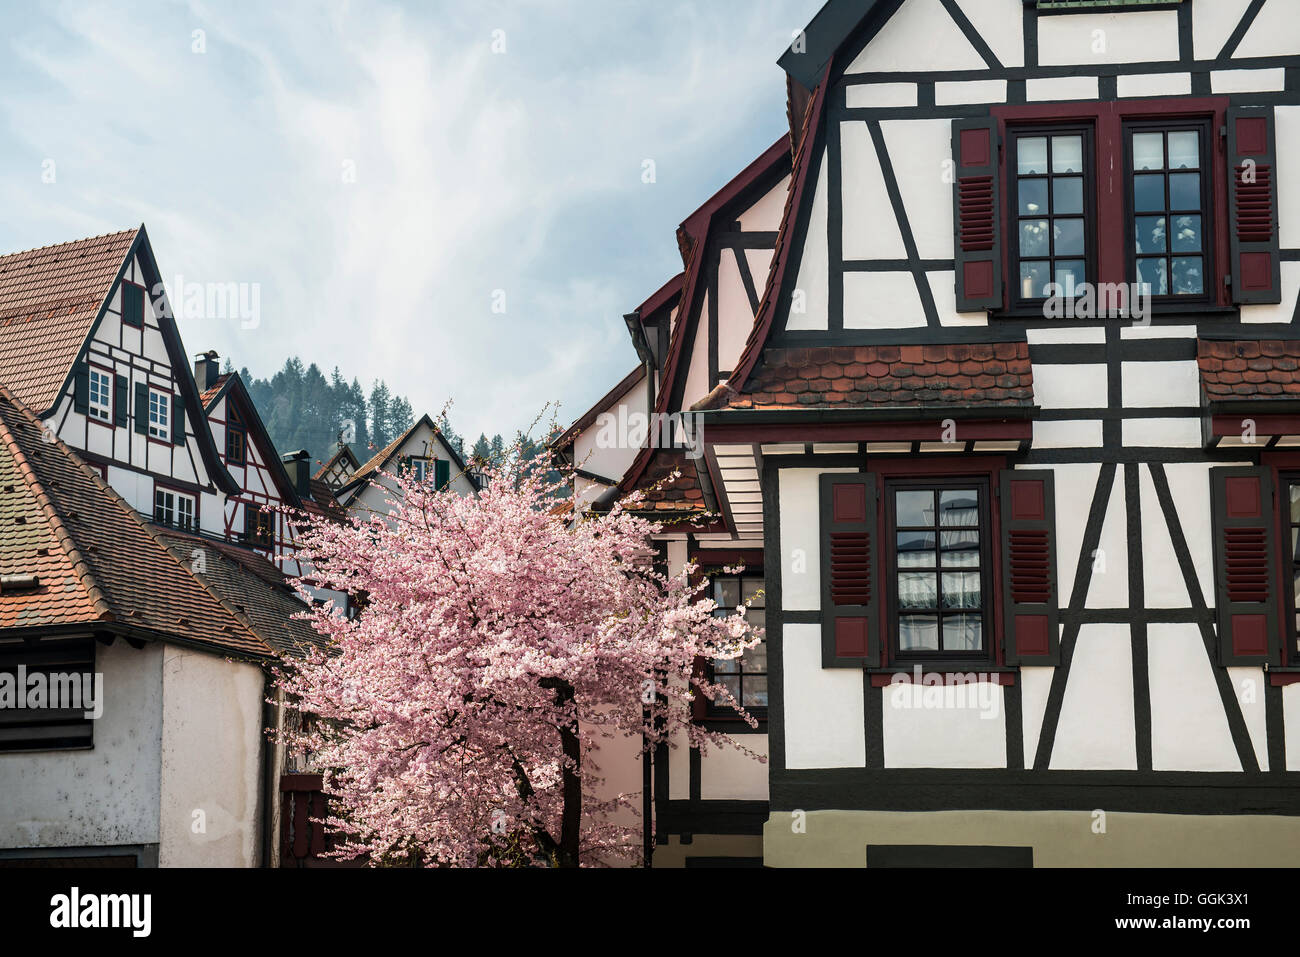 Timber frame houses and tree in blossom, Schiltach, Black Forest, Baden-Wuerttemberg, Germany Stock Photo